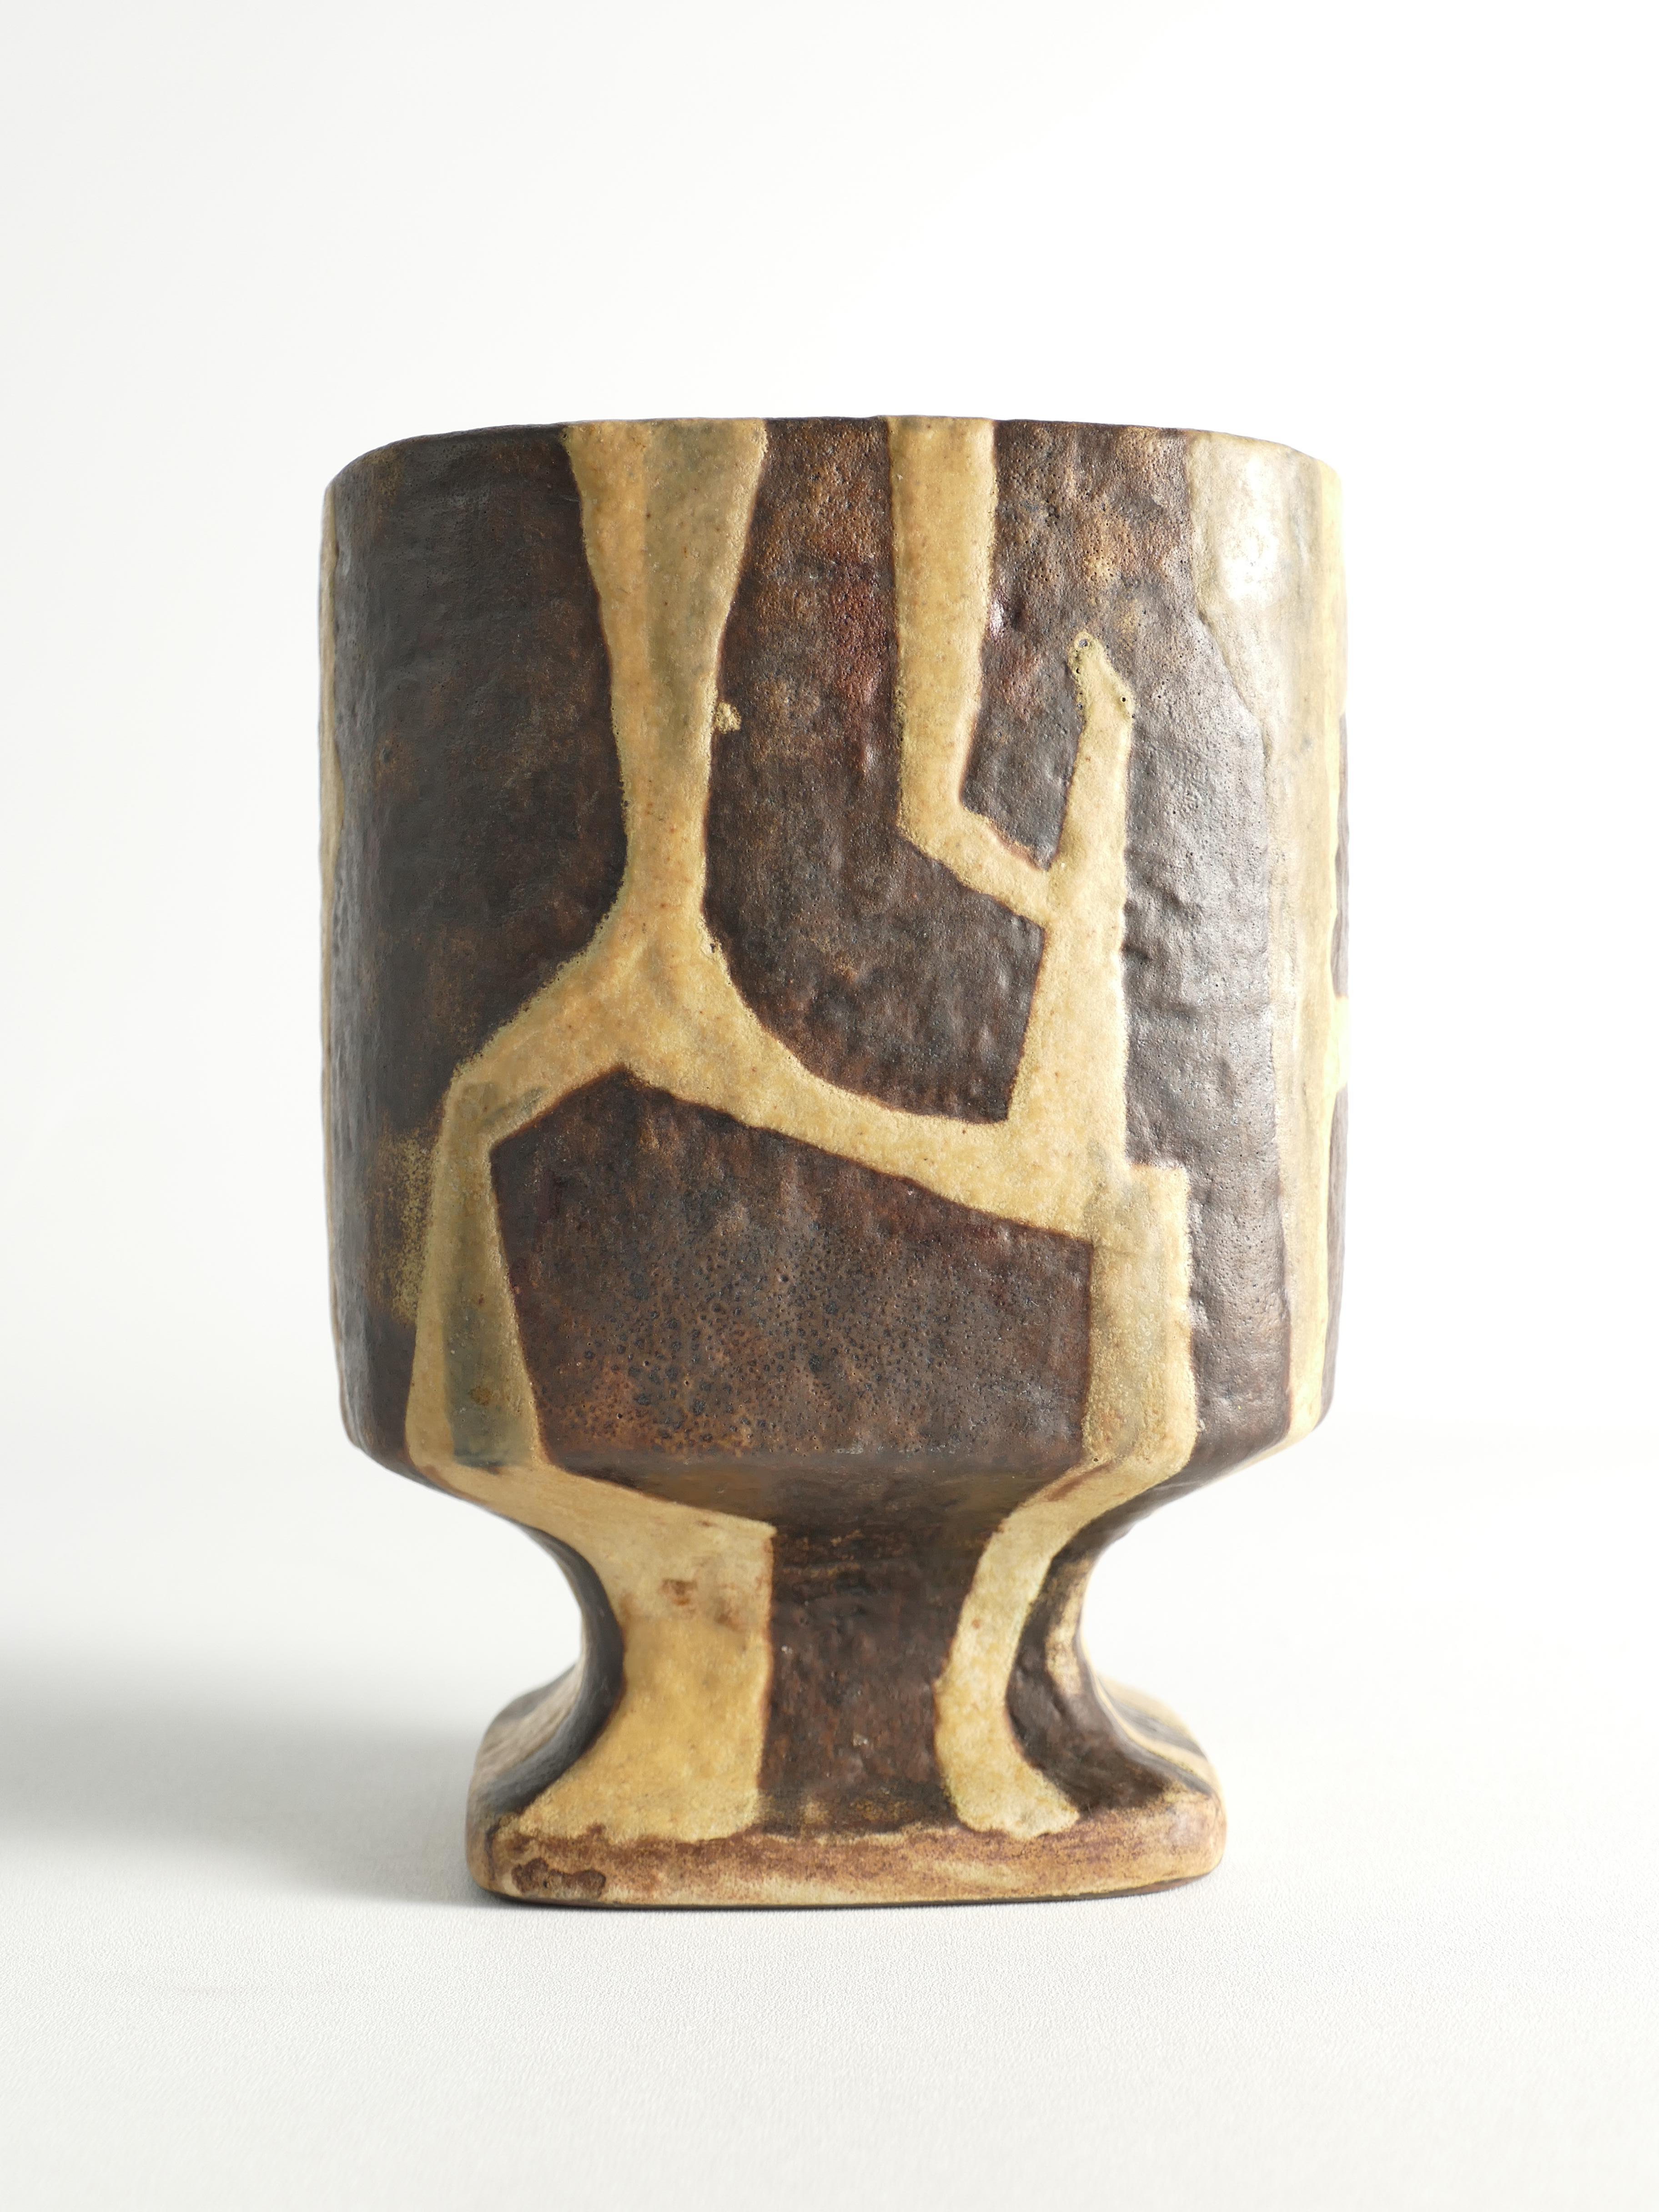 This is a rare ceramic vase produced by the Staatliche Majolika Manufaktur Karlsruhe, also known as Karlsruher Majolika. The vase is designed by Fridegart Glatzle a prominent post-war designer. The vase features a unique square design with four